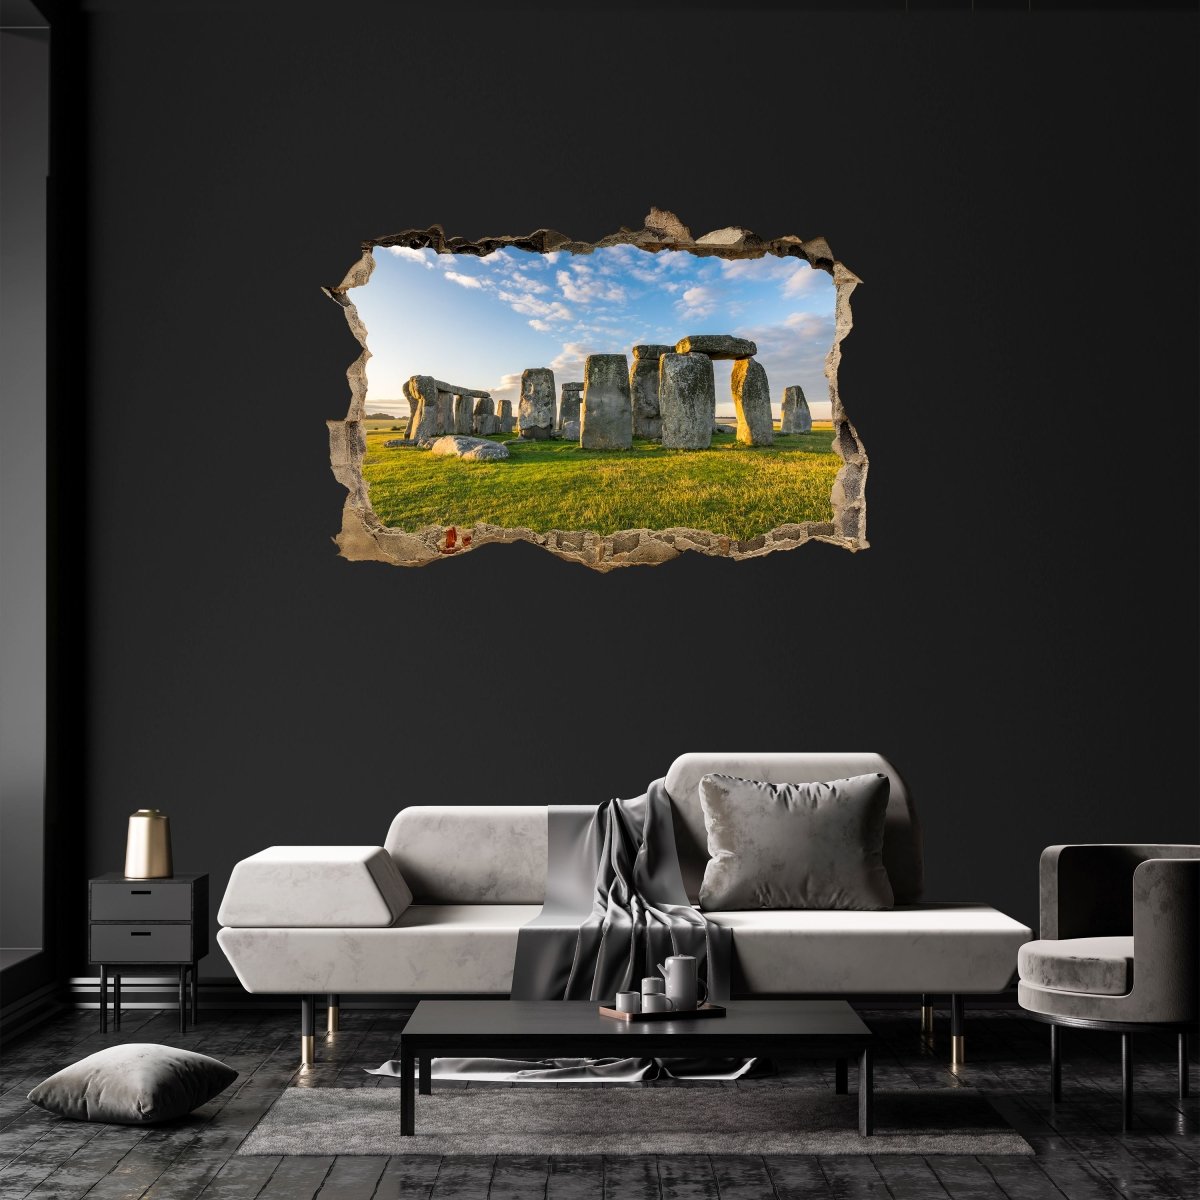 3D wall sticker view of Stonehenge, England, stones - Wall Decal M1101